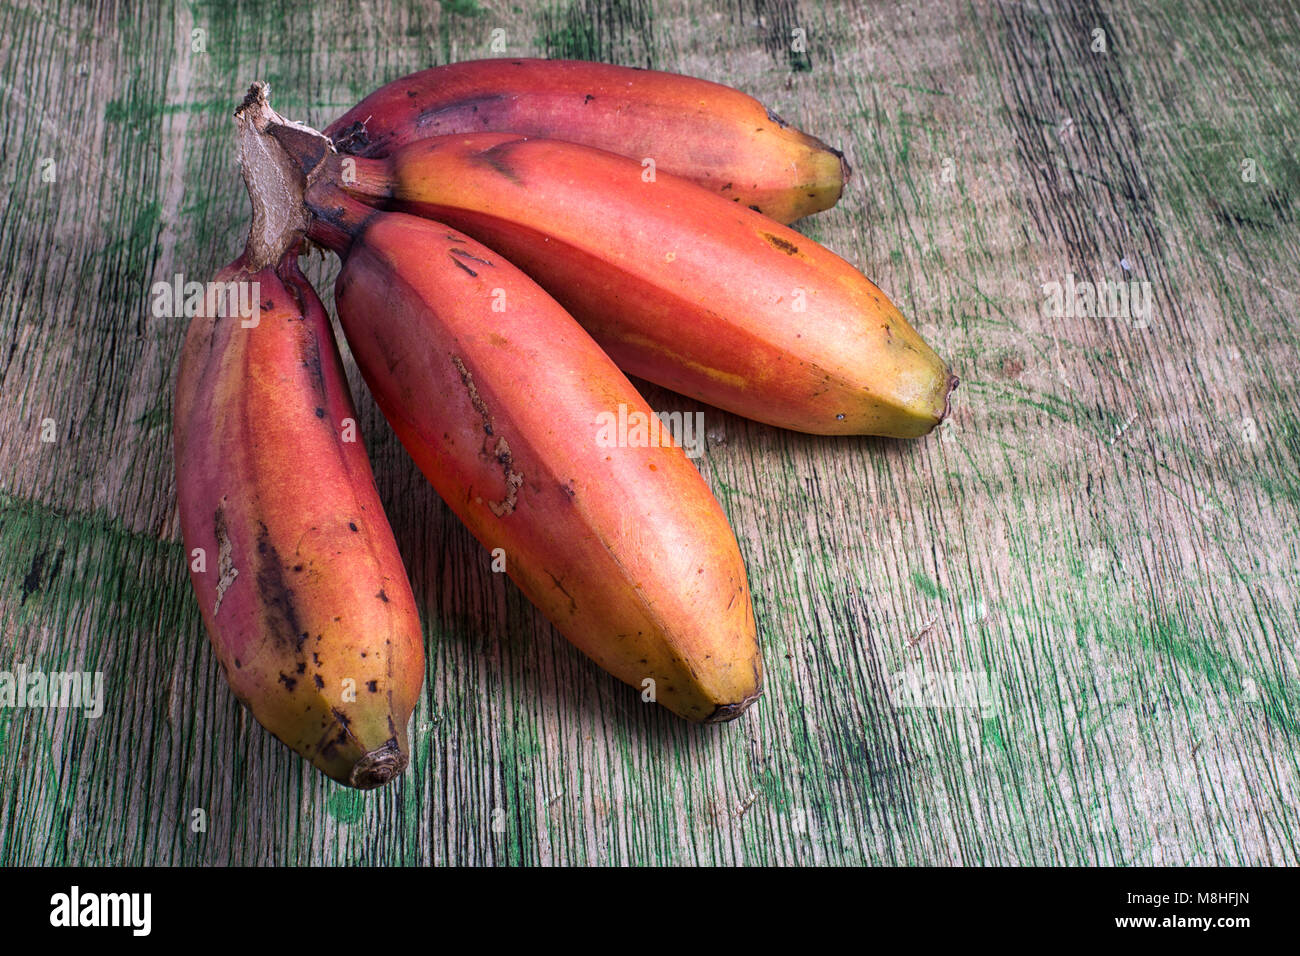 red banana variety in South America Stock Photo